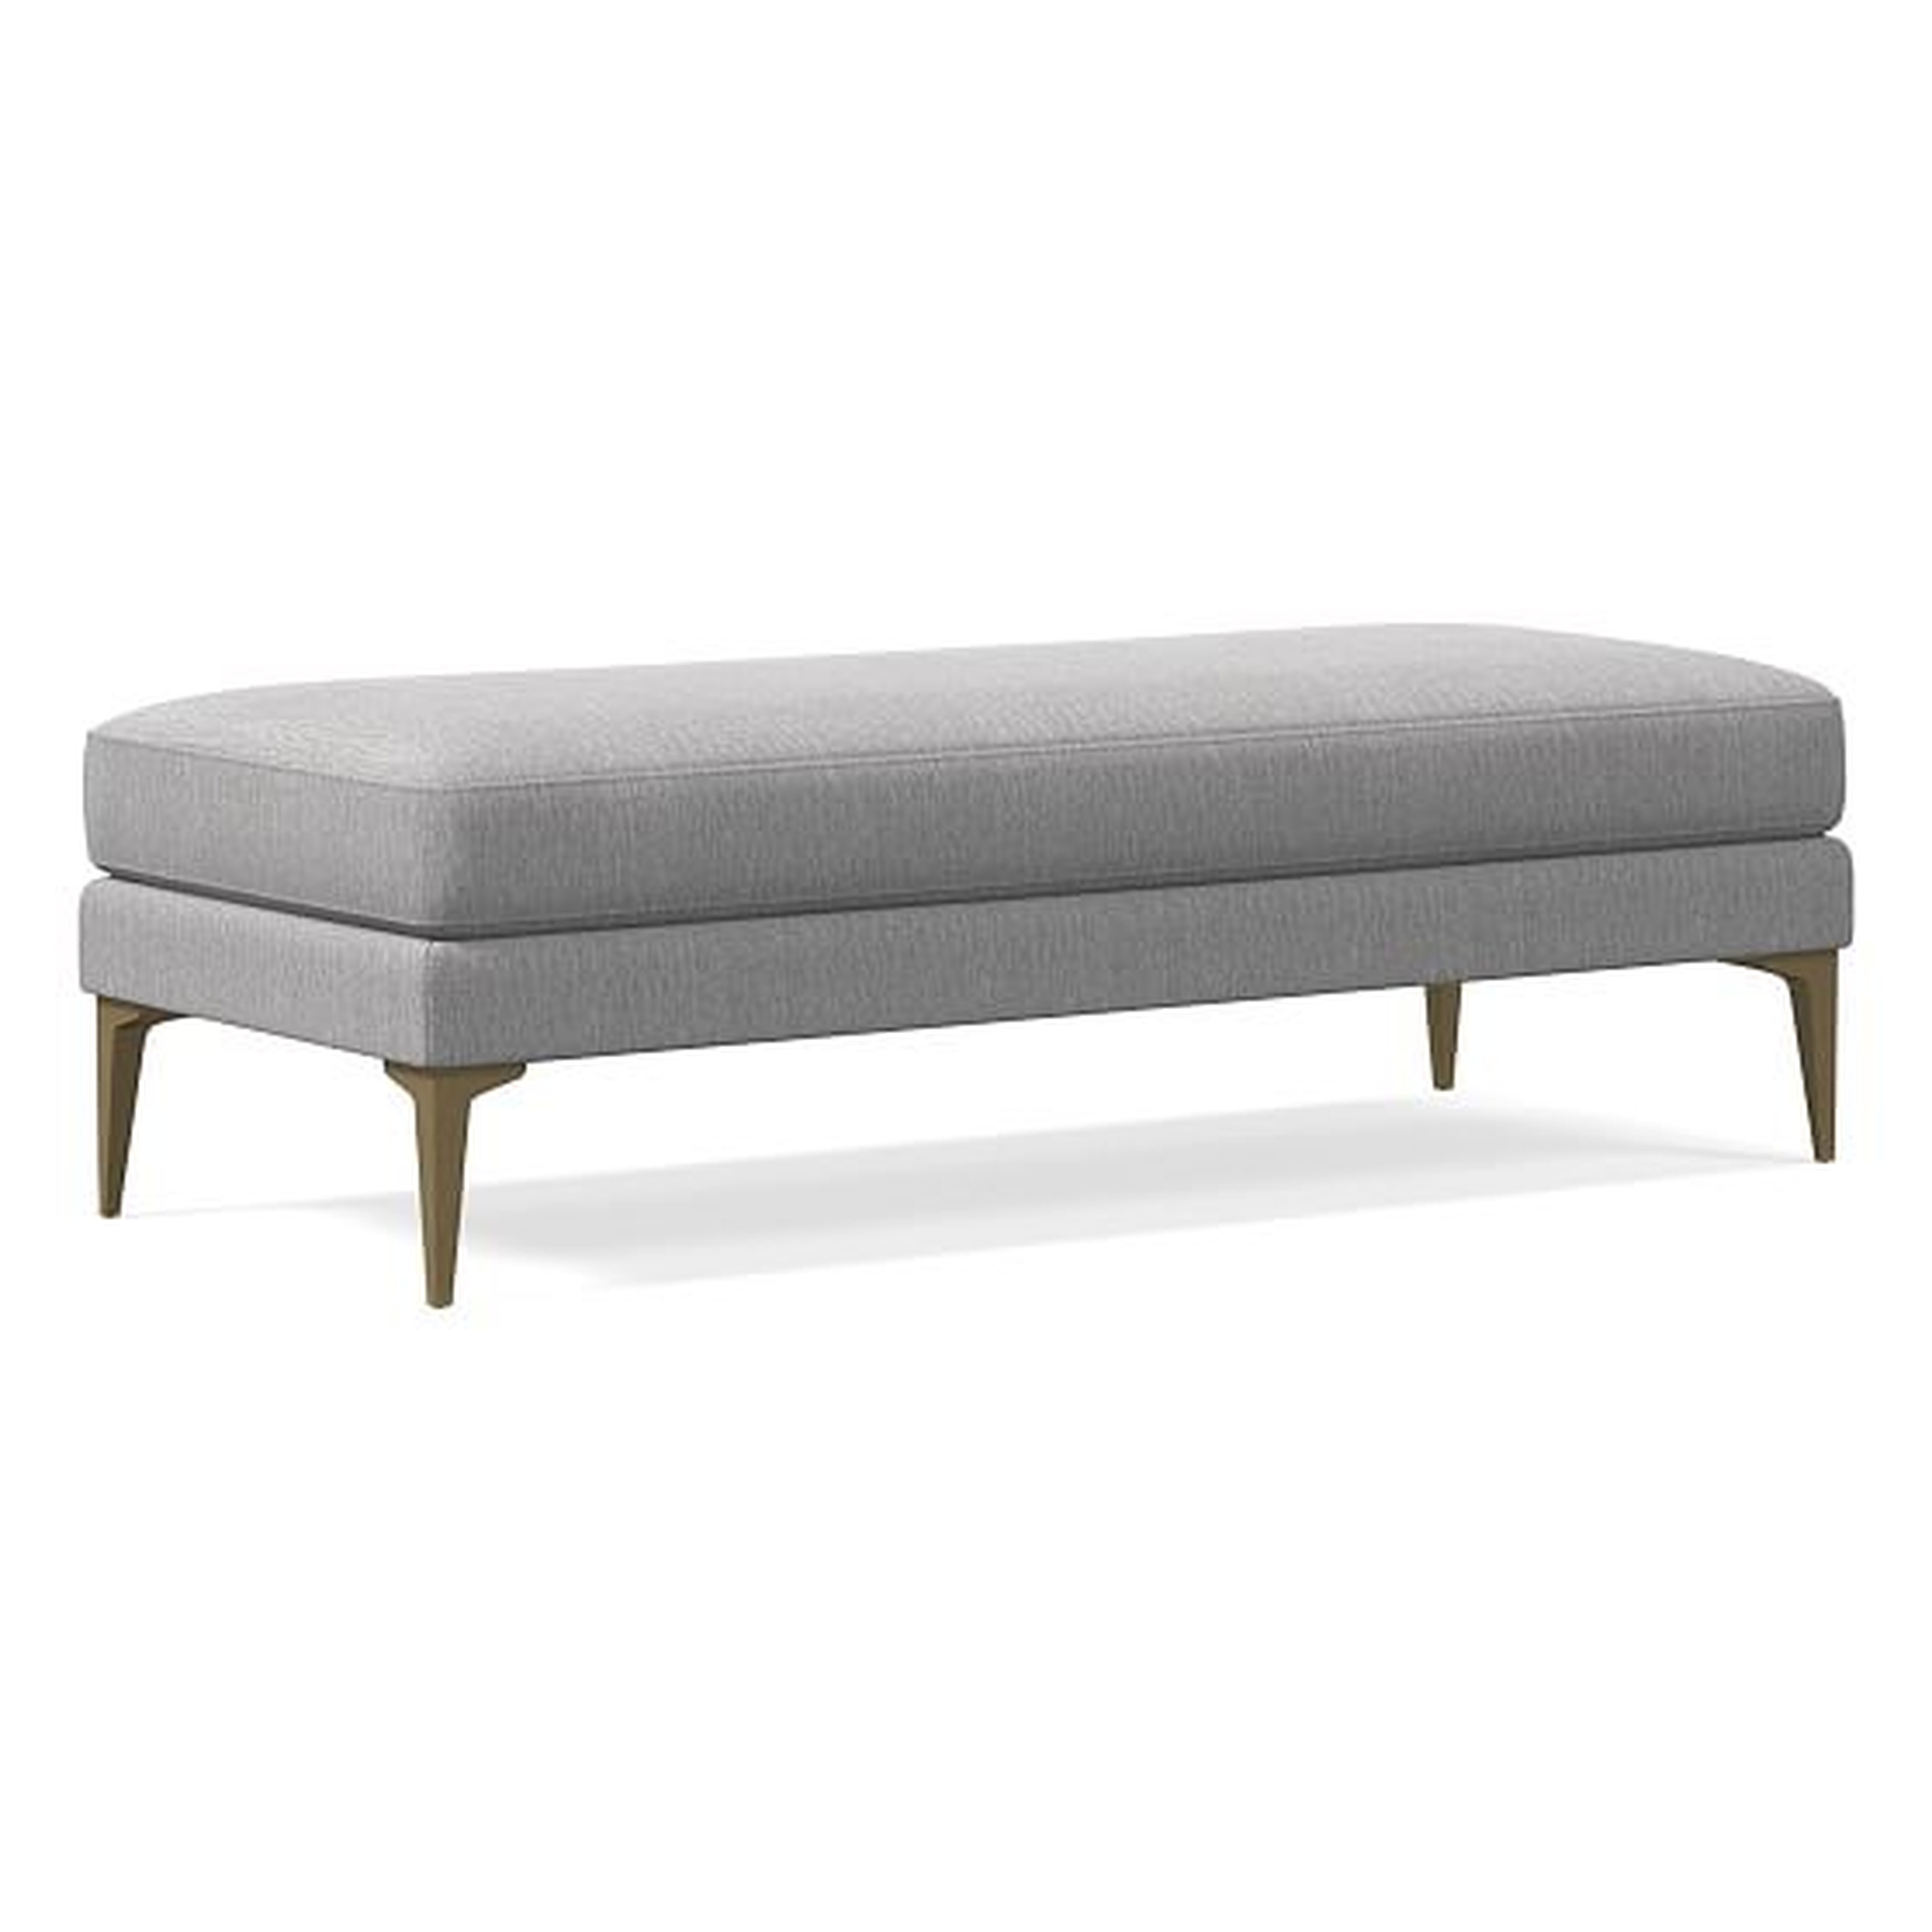 Andes Bench, Poly, Sunbrella Performance Chenille, Fog, Blackened Brass - West Elm